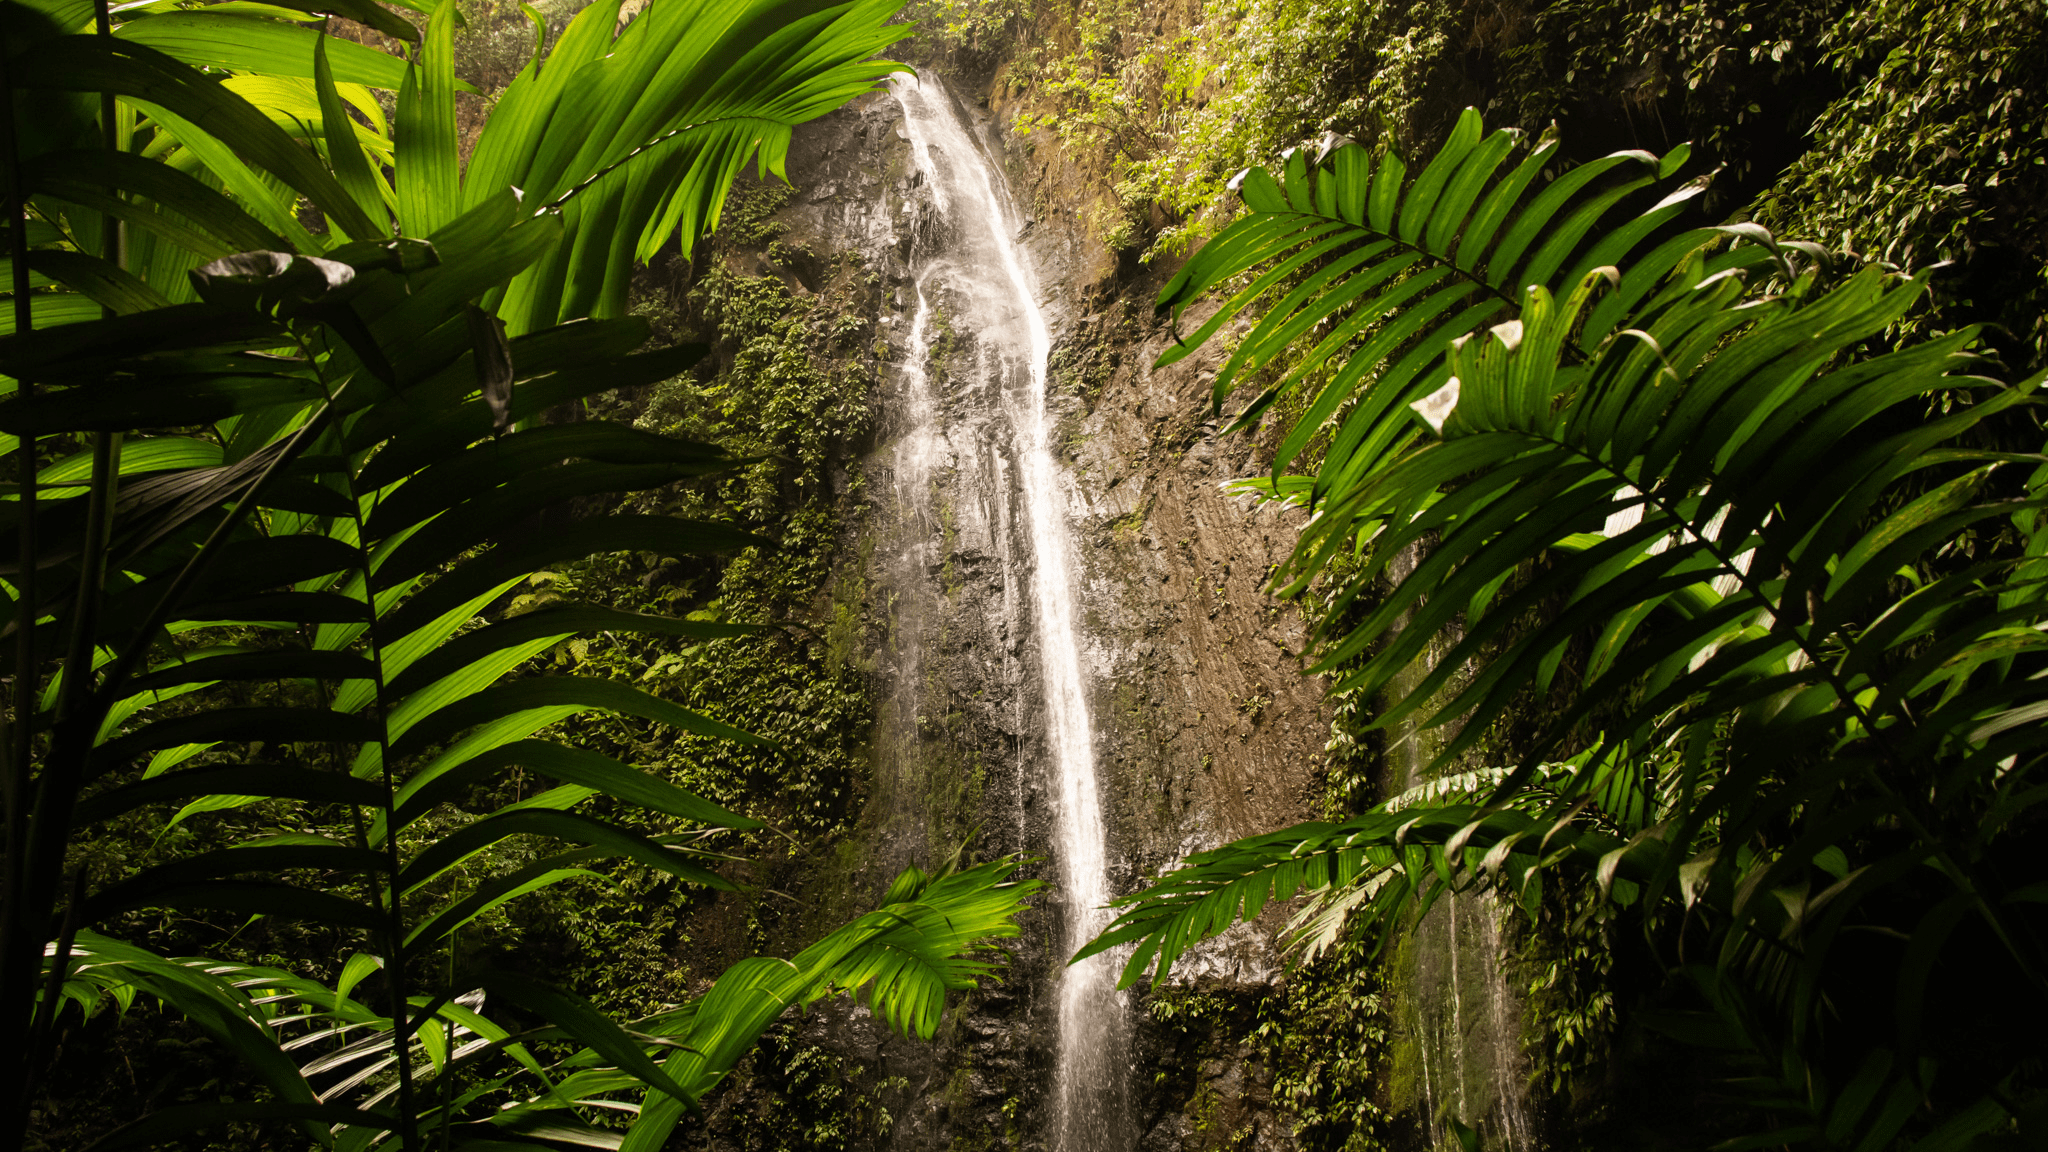 Water cascades down the mountainside, framed by lush greenery